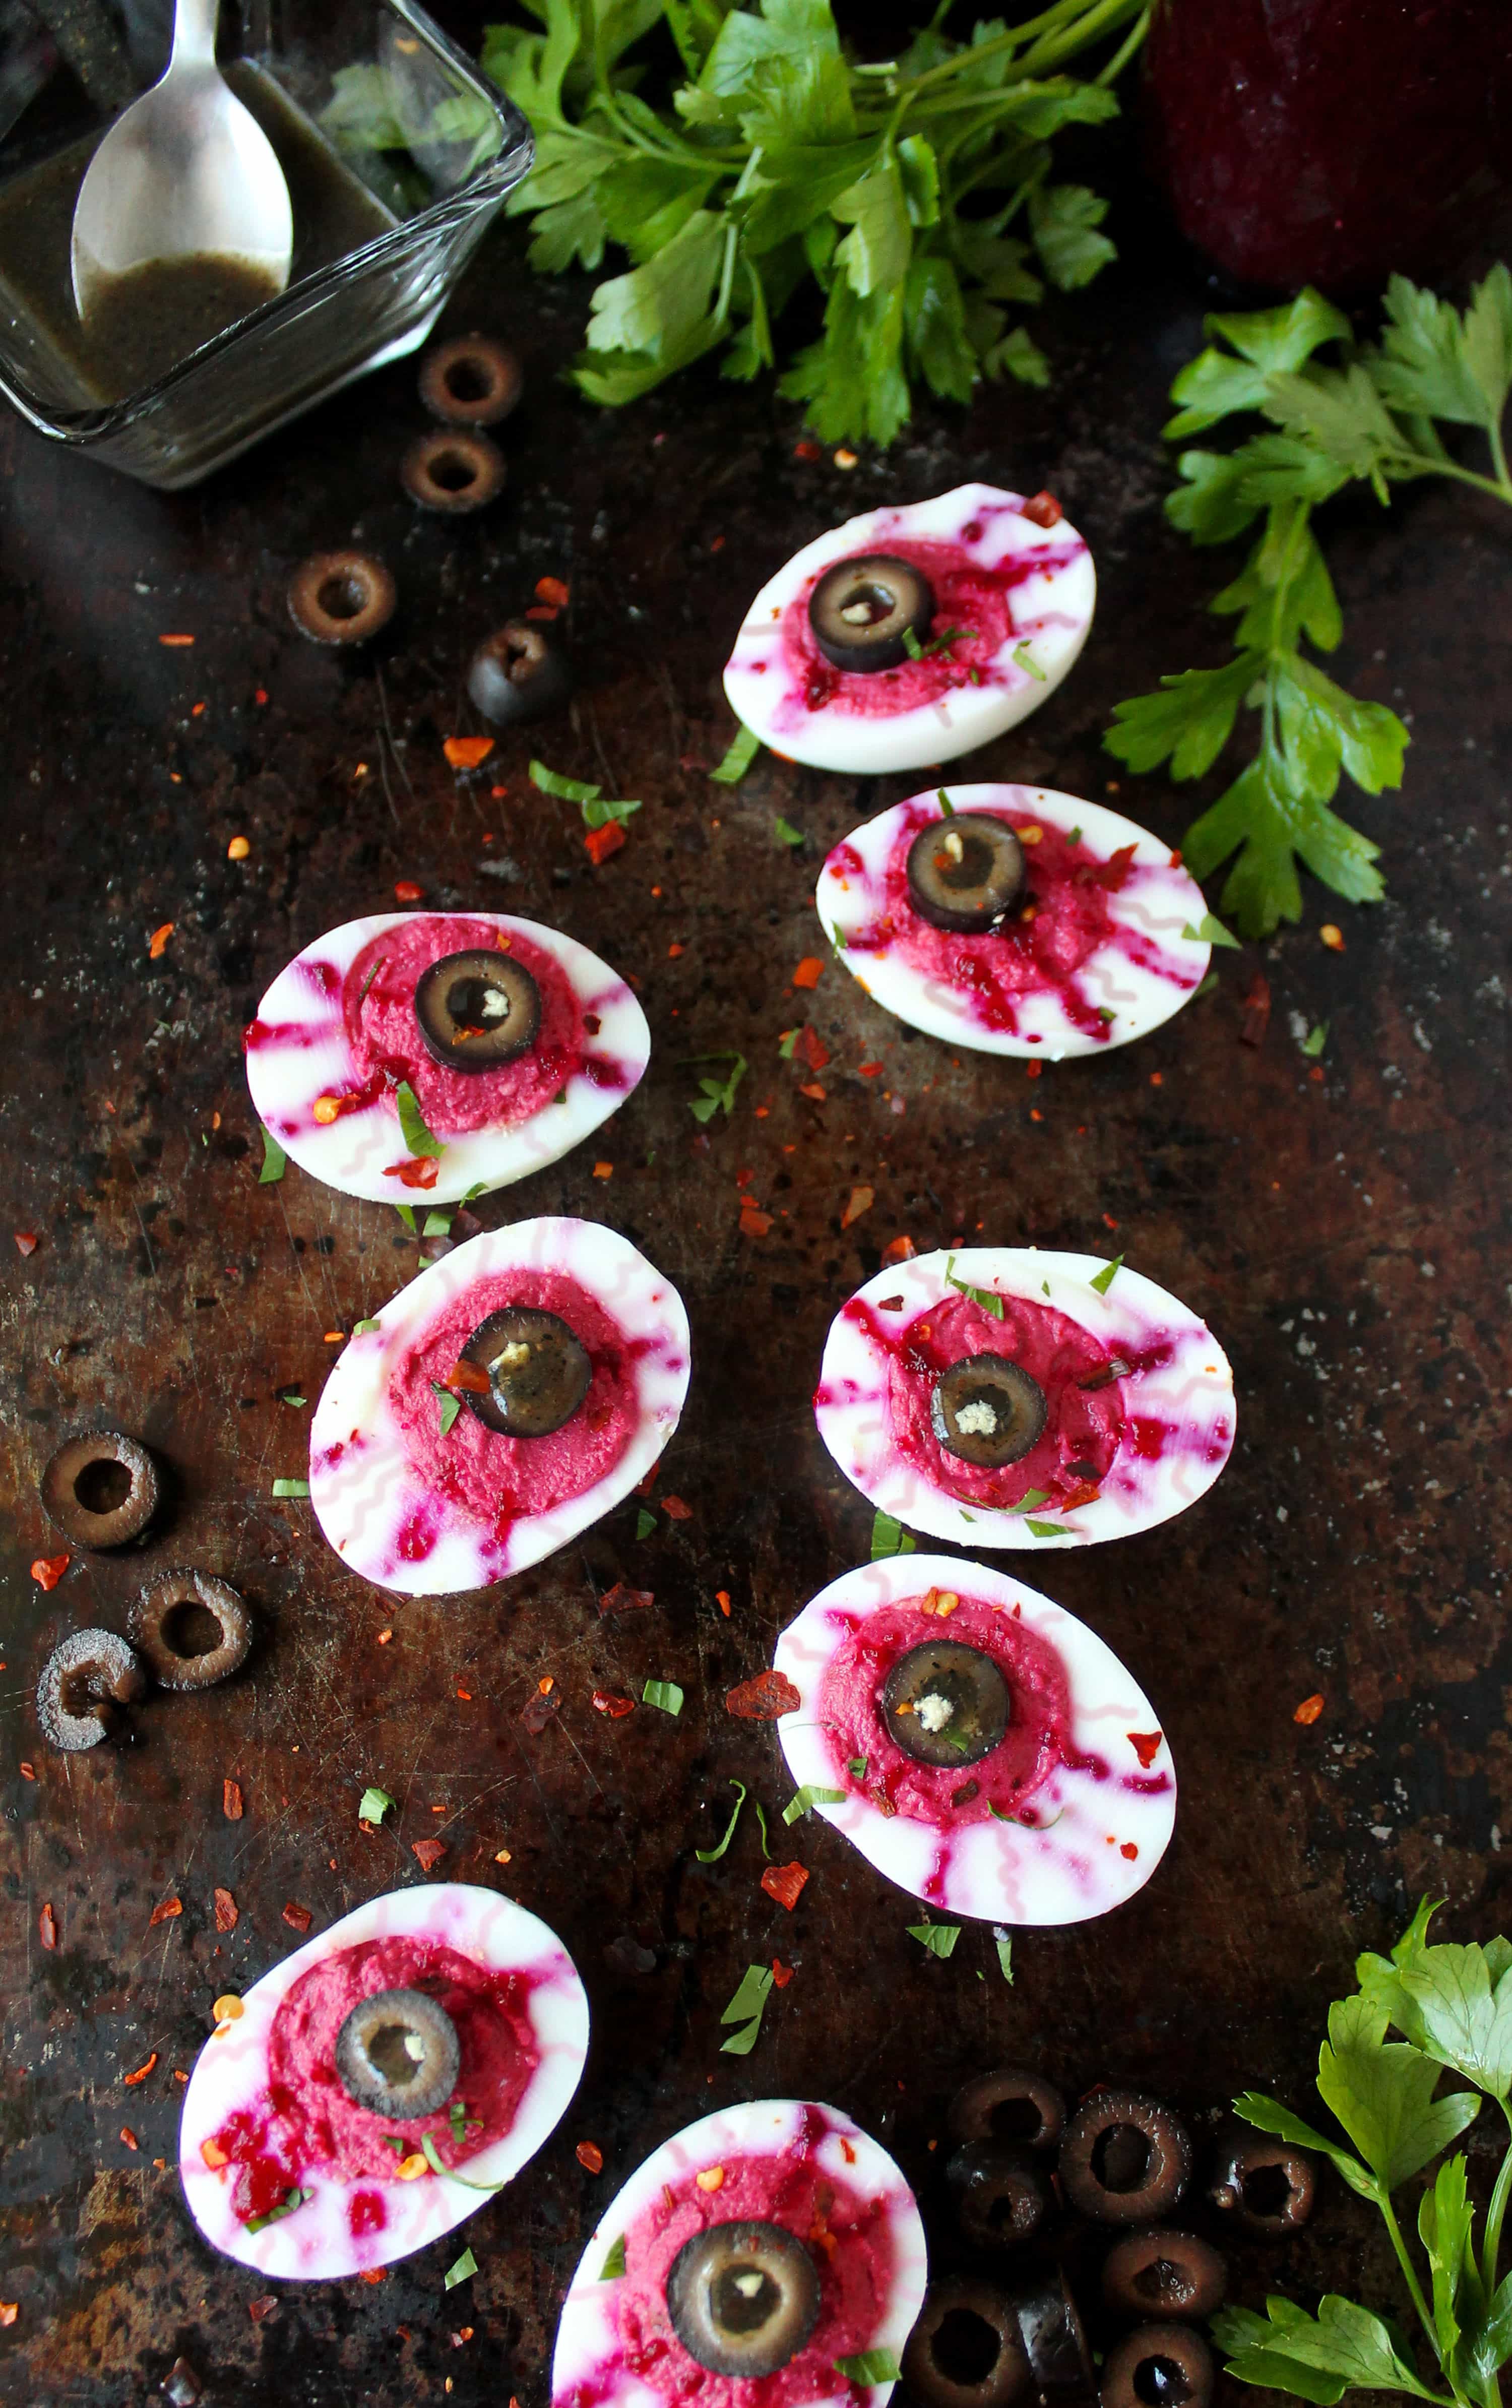 Deviled Egg Bloody Eyeballs - Deviled eggs loose the mayo and gain a bit of healthy in these bloody beety eyeballs!